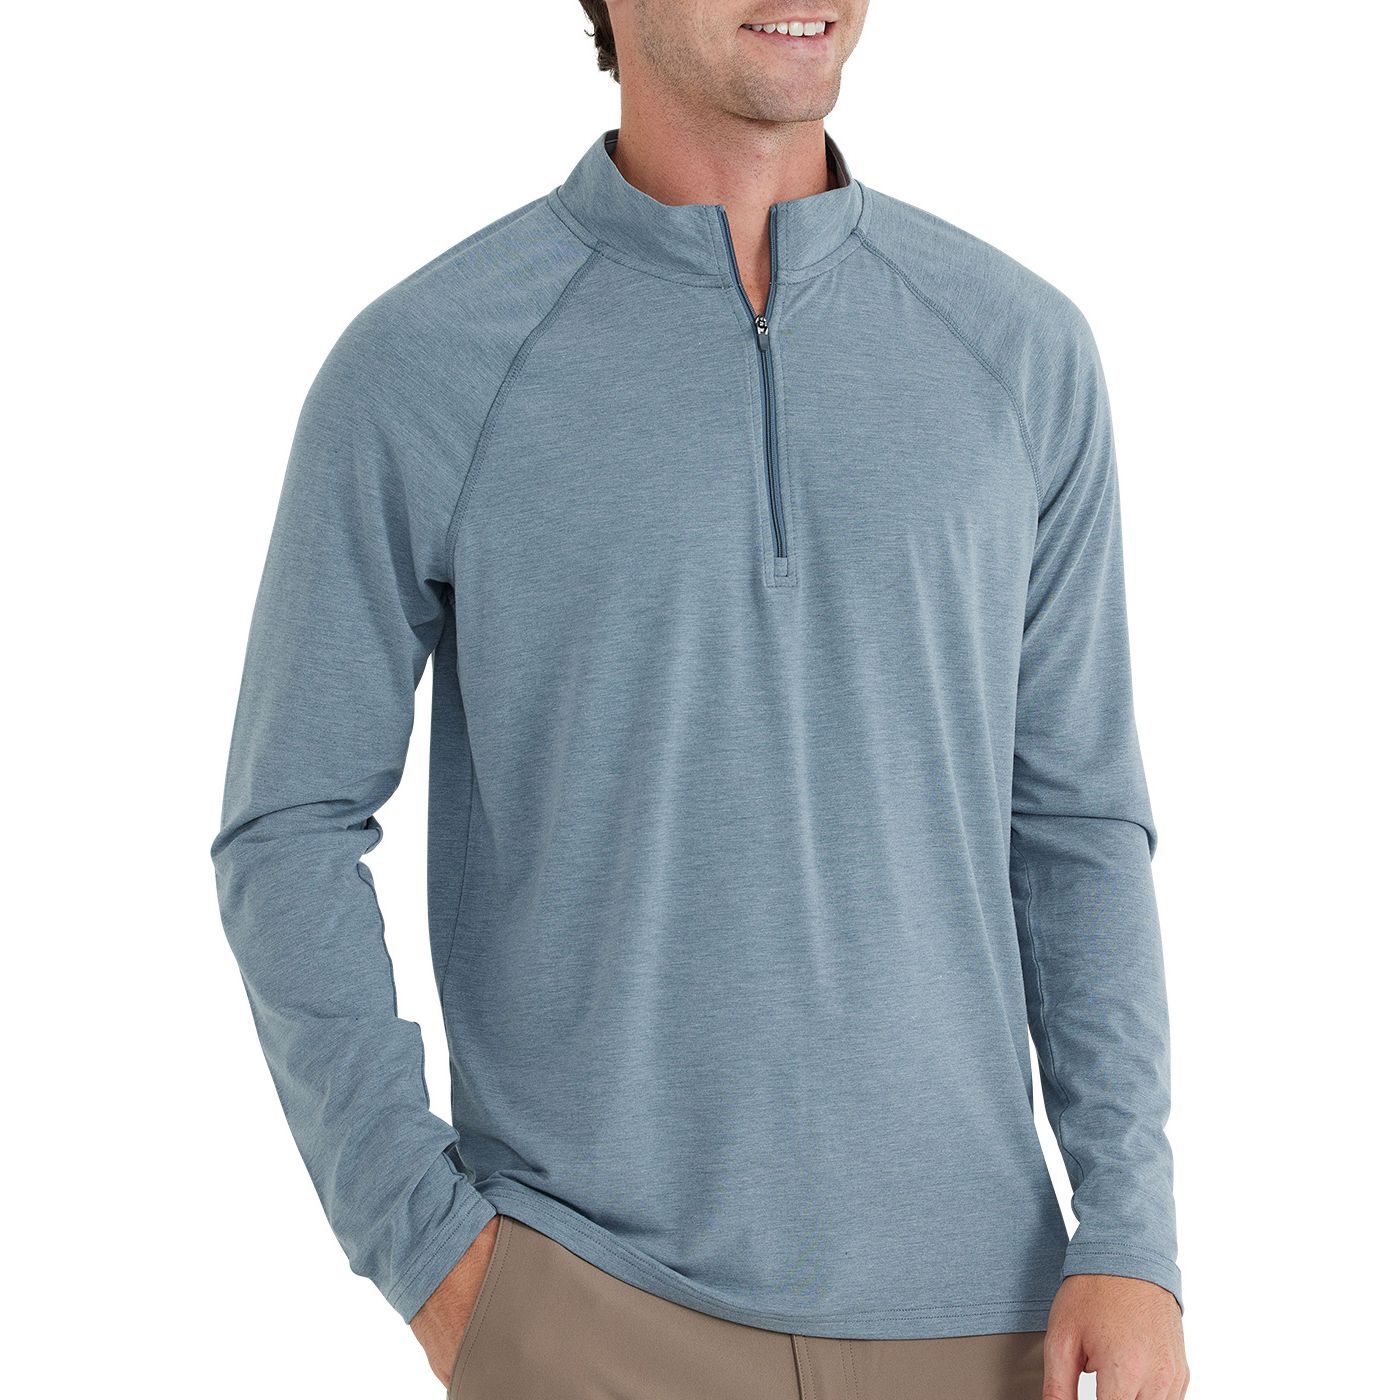 Free Fly Bamboo Flex Quarter Zip Heather Blue Current Image 1